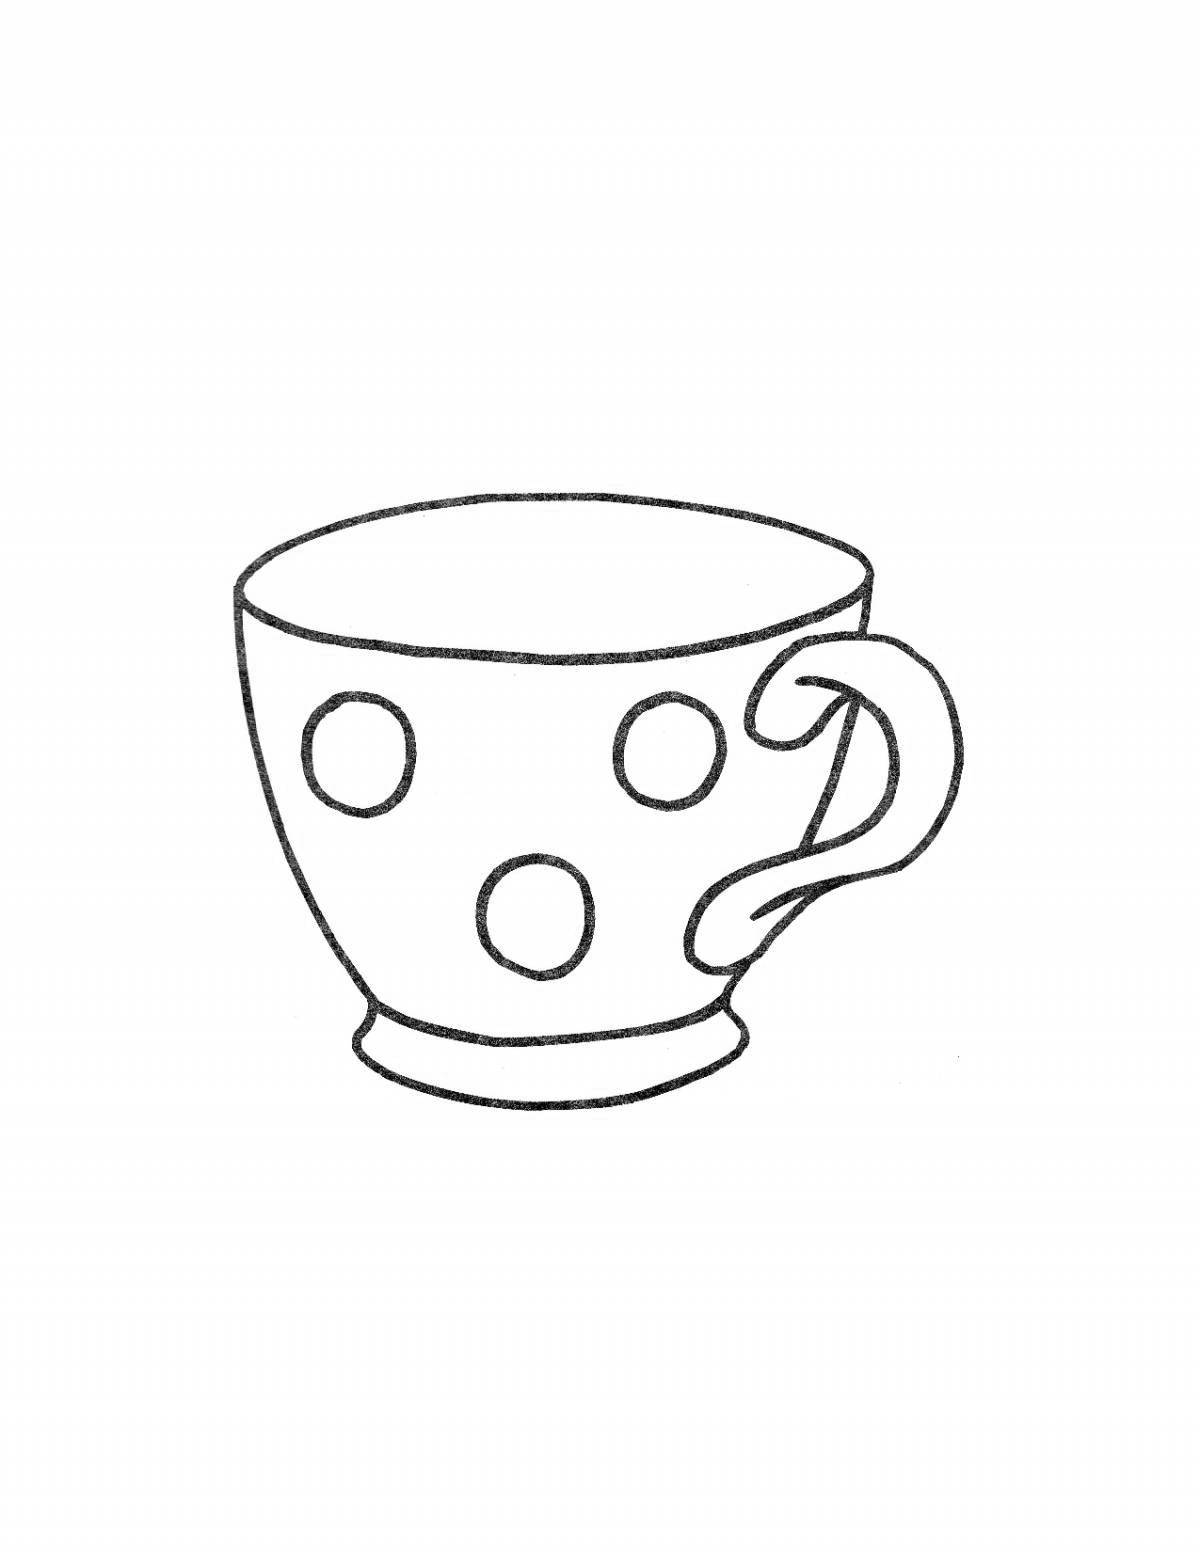 Splendid cup coloring book for kids